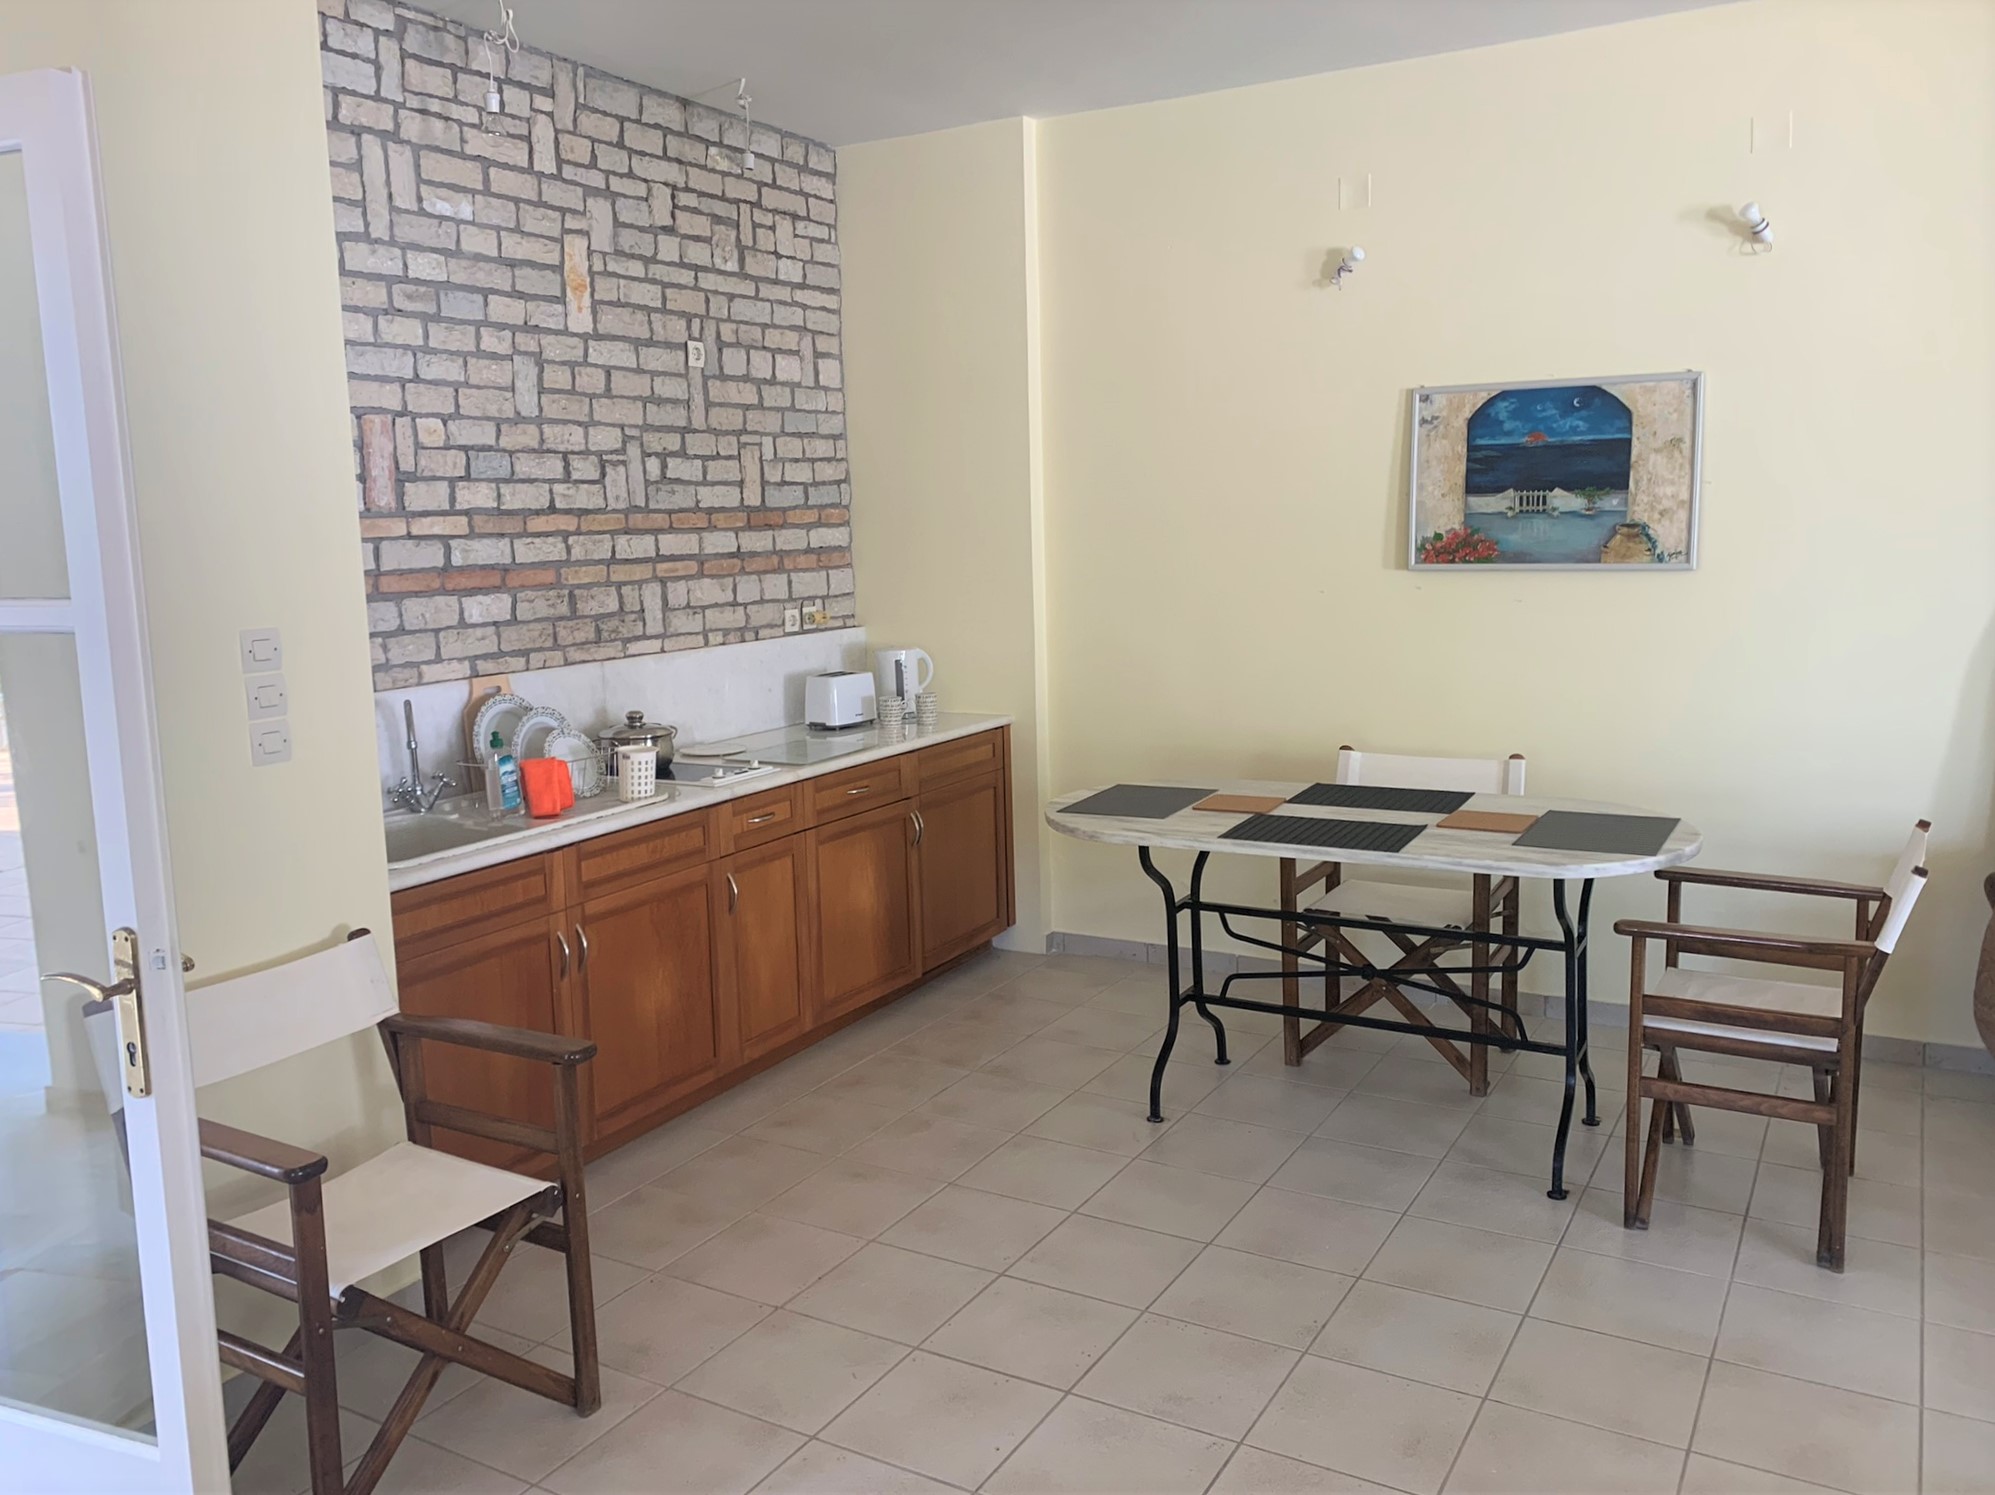 Kitchen area of house for rent on Ithaca Greece, Aetos